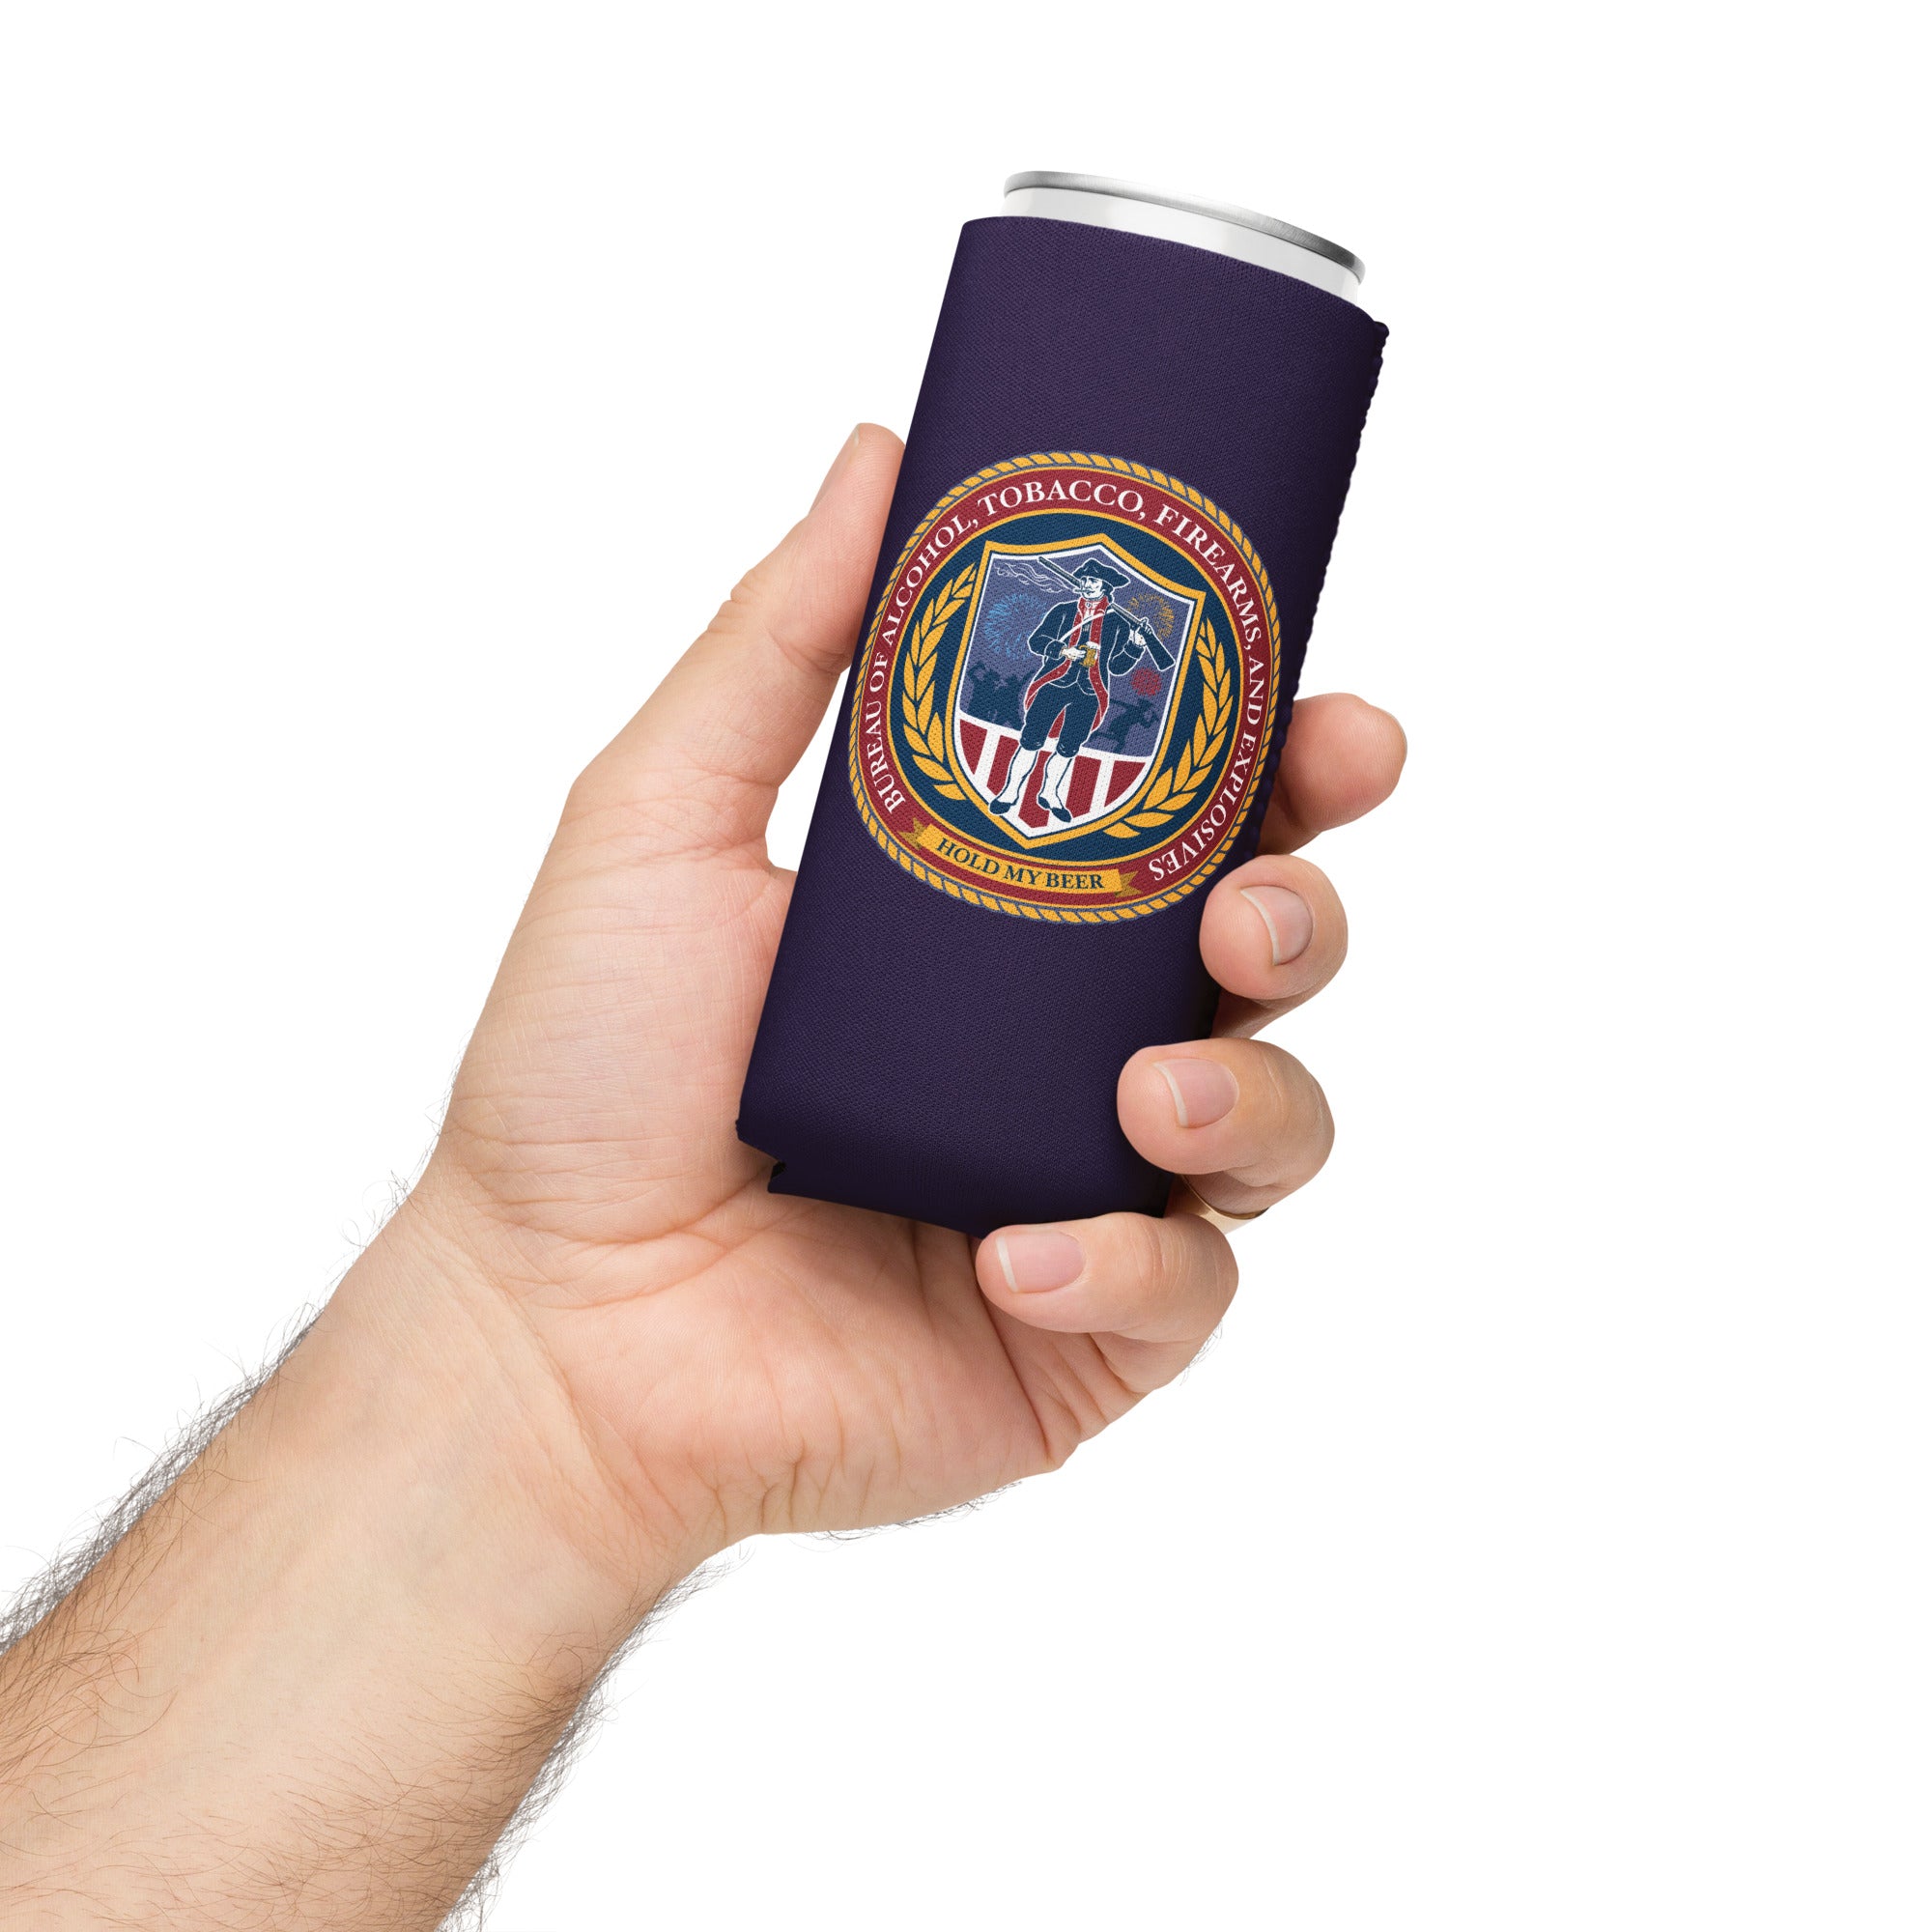 ATF Hold My Beer Can Cooler